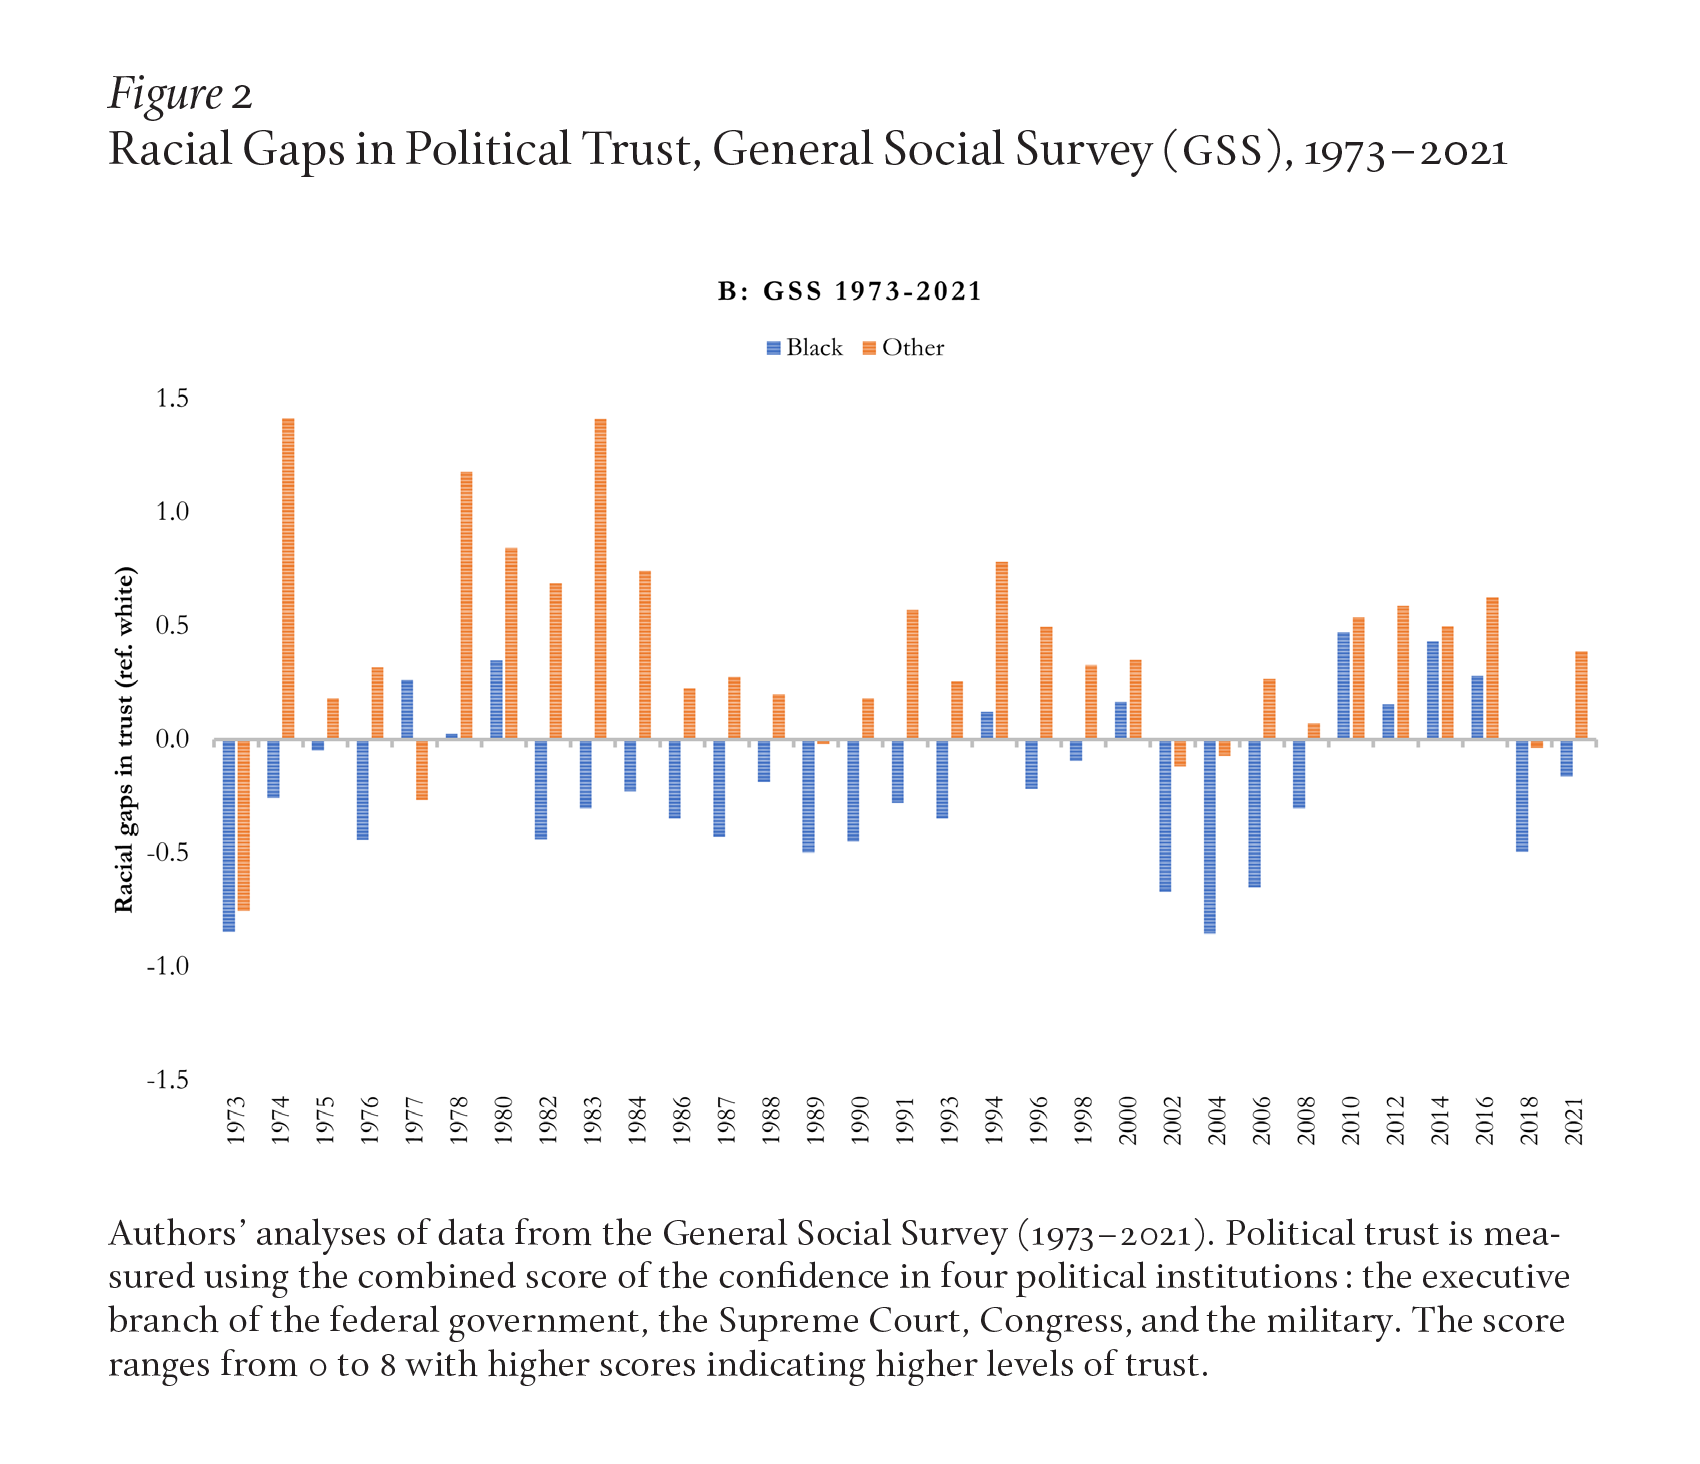 Figure 2 shows racial gaps in trust in the General Social Survey among Black and other respondents, with Whites as the reference. Regardless of how political trust is measured, trust is not always lower among racial and ethnic minorities compared with the White majority group.